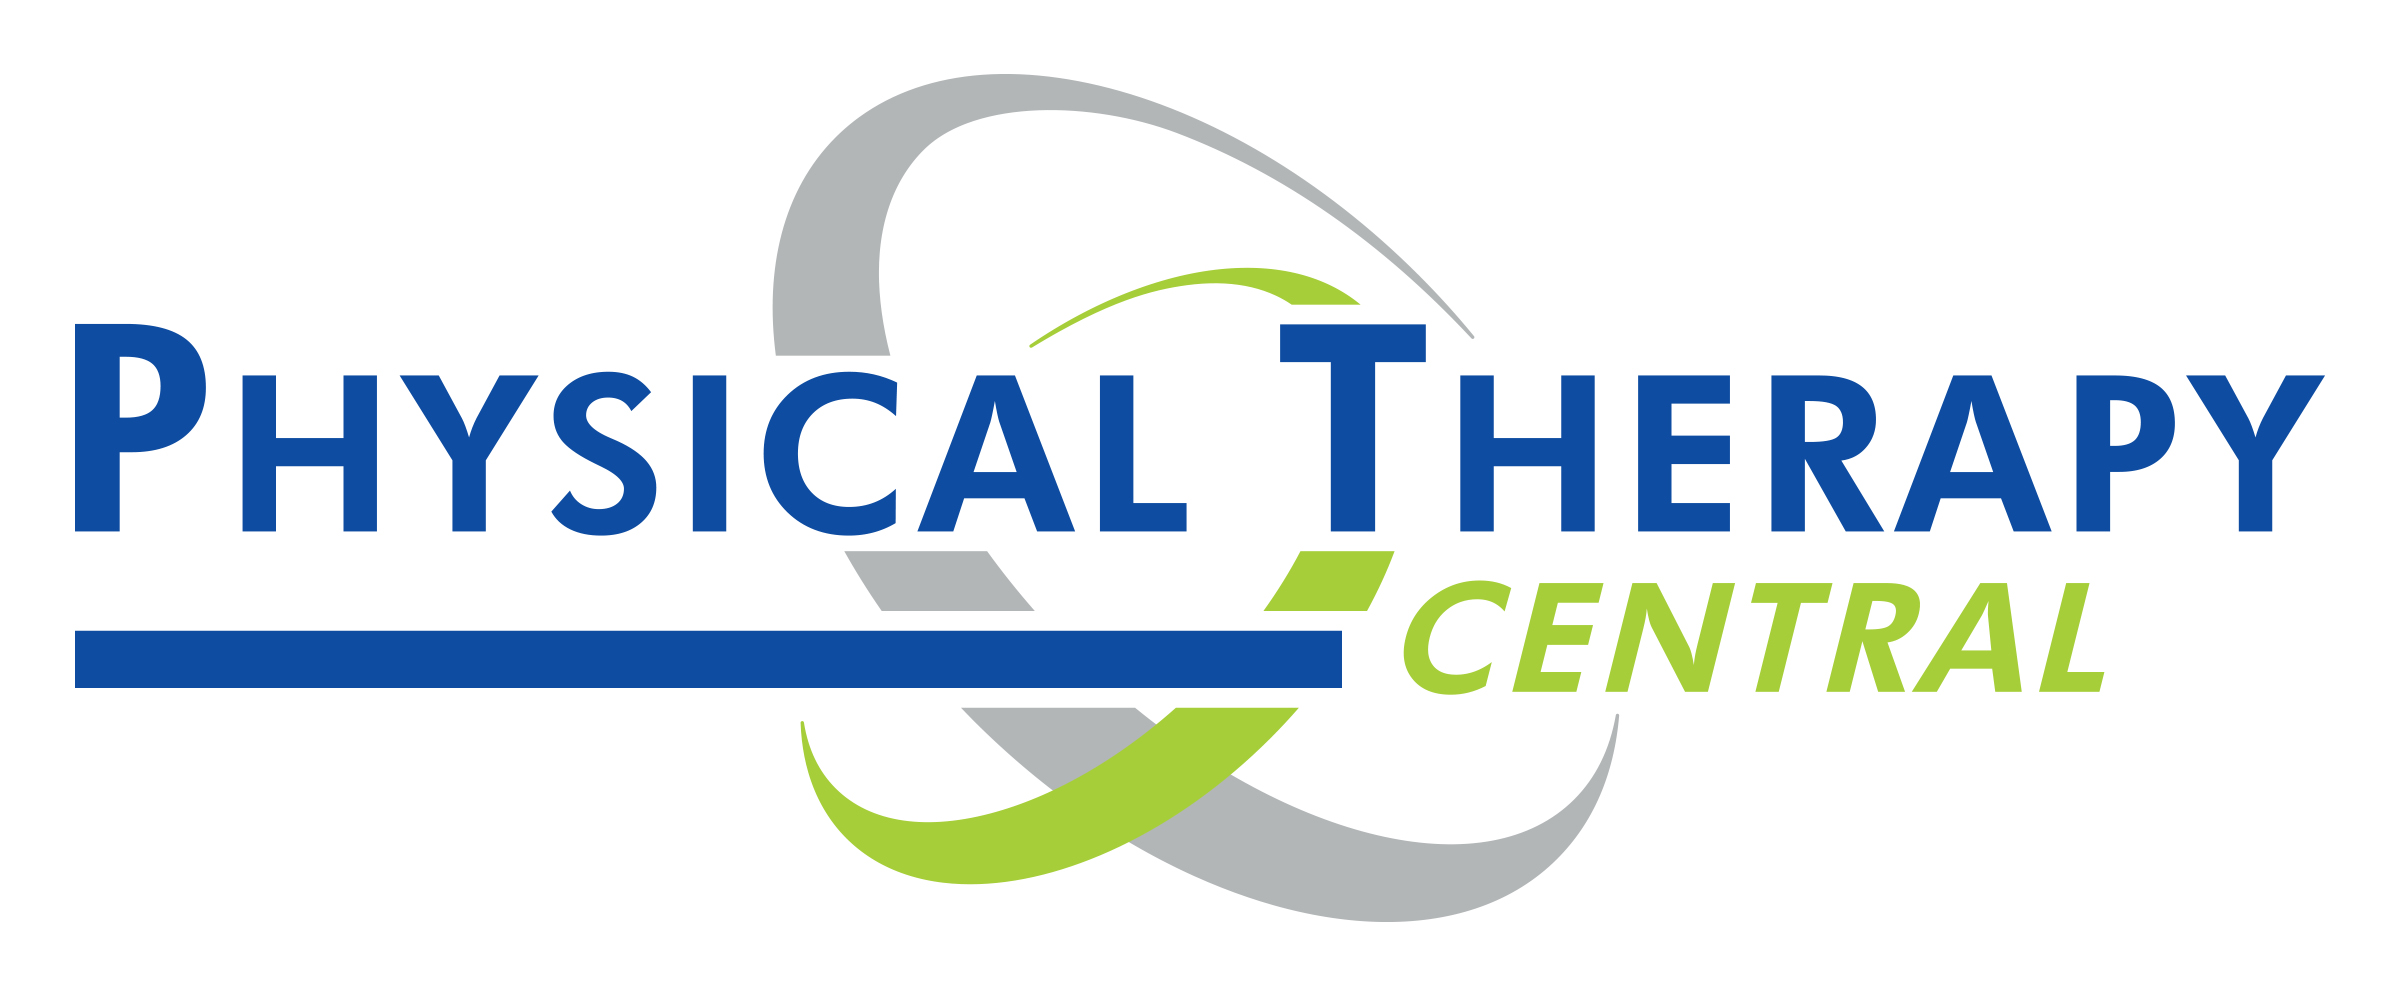 Physical Therapy Central-Oklahoma City (8200 S Walker Ave)